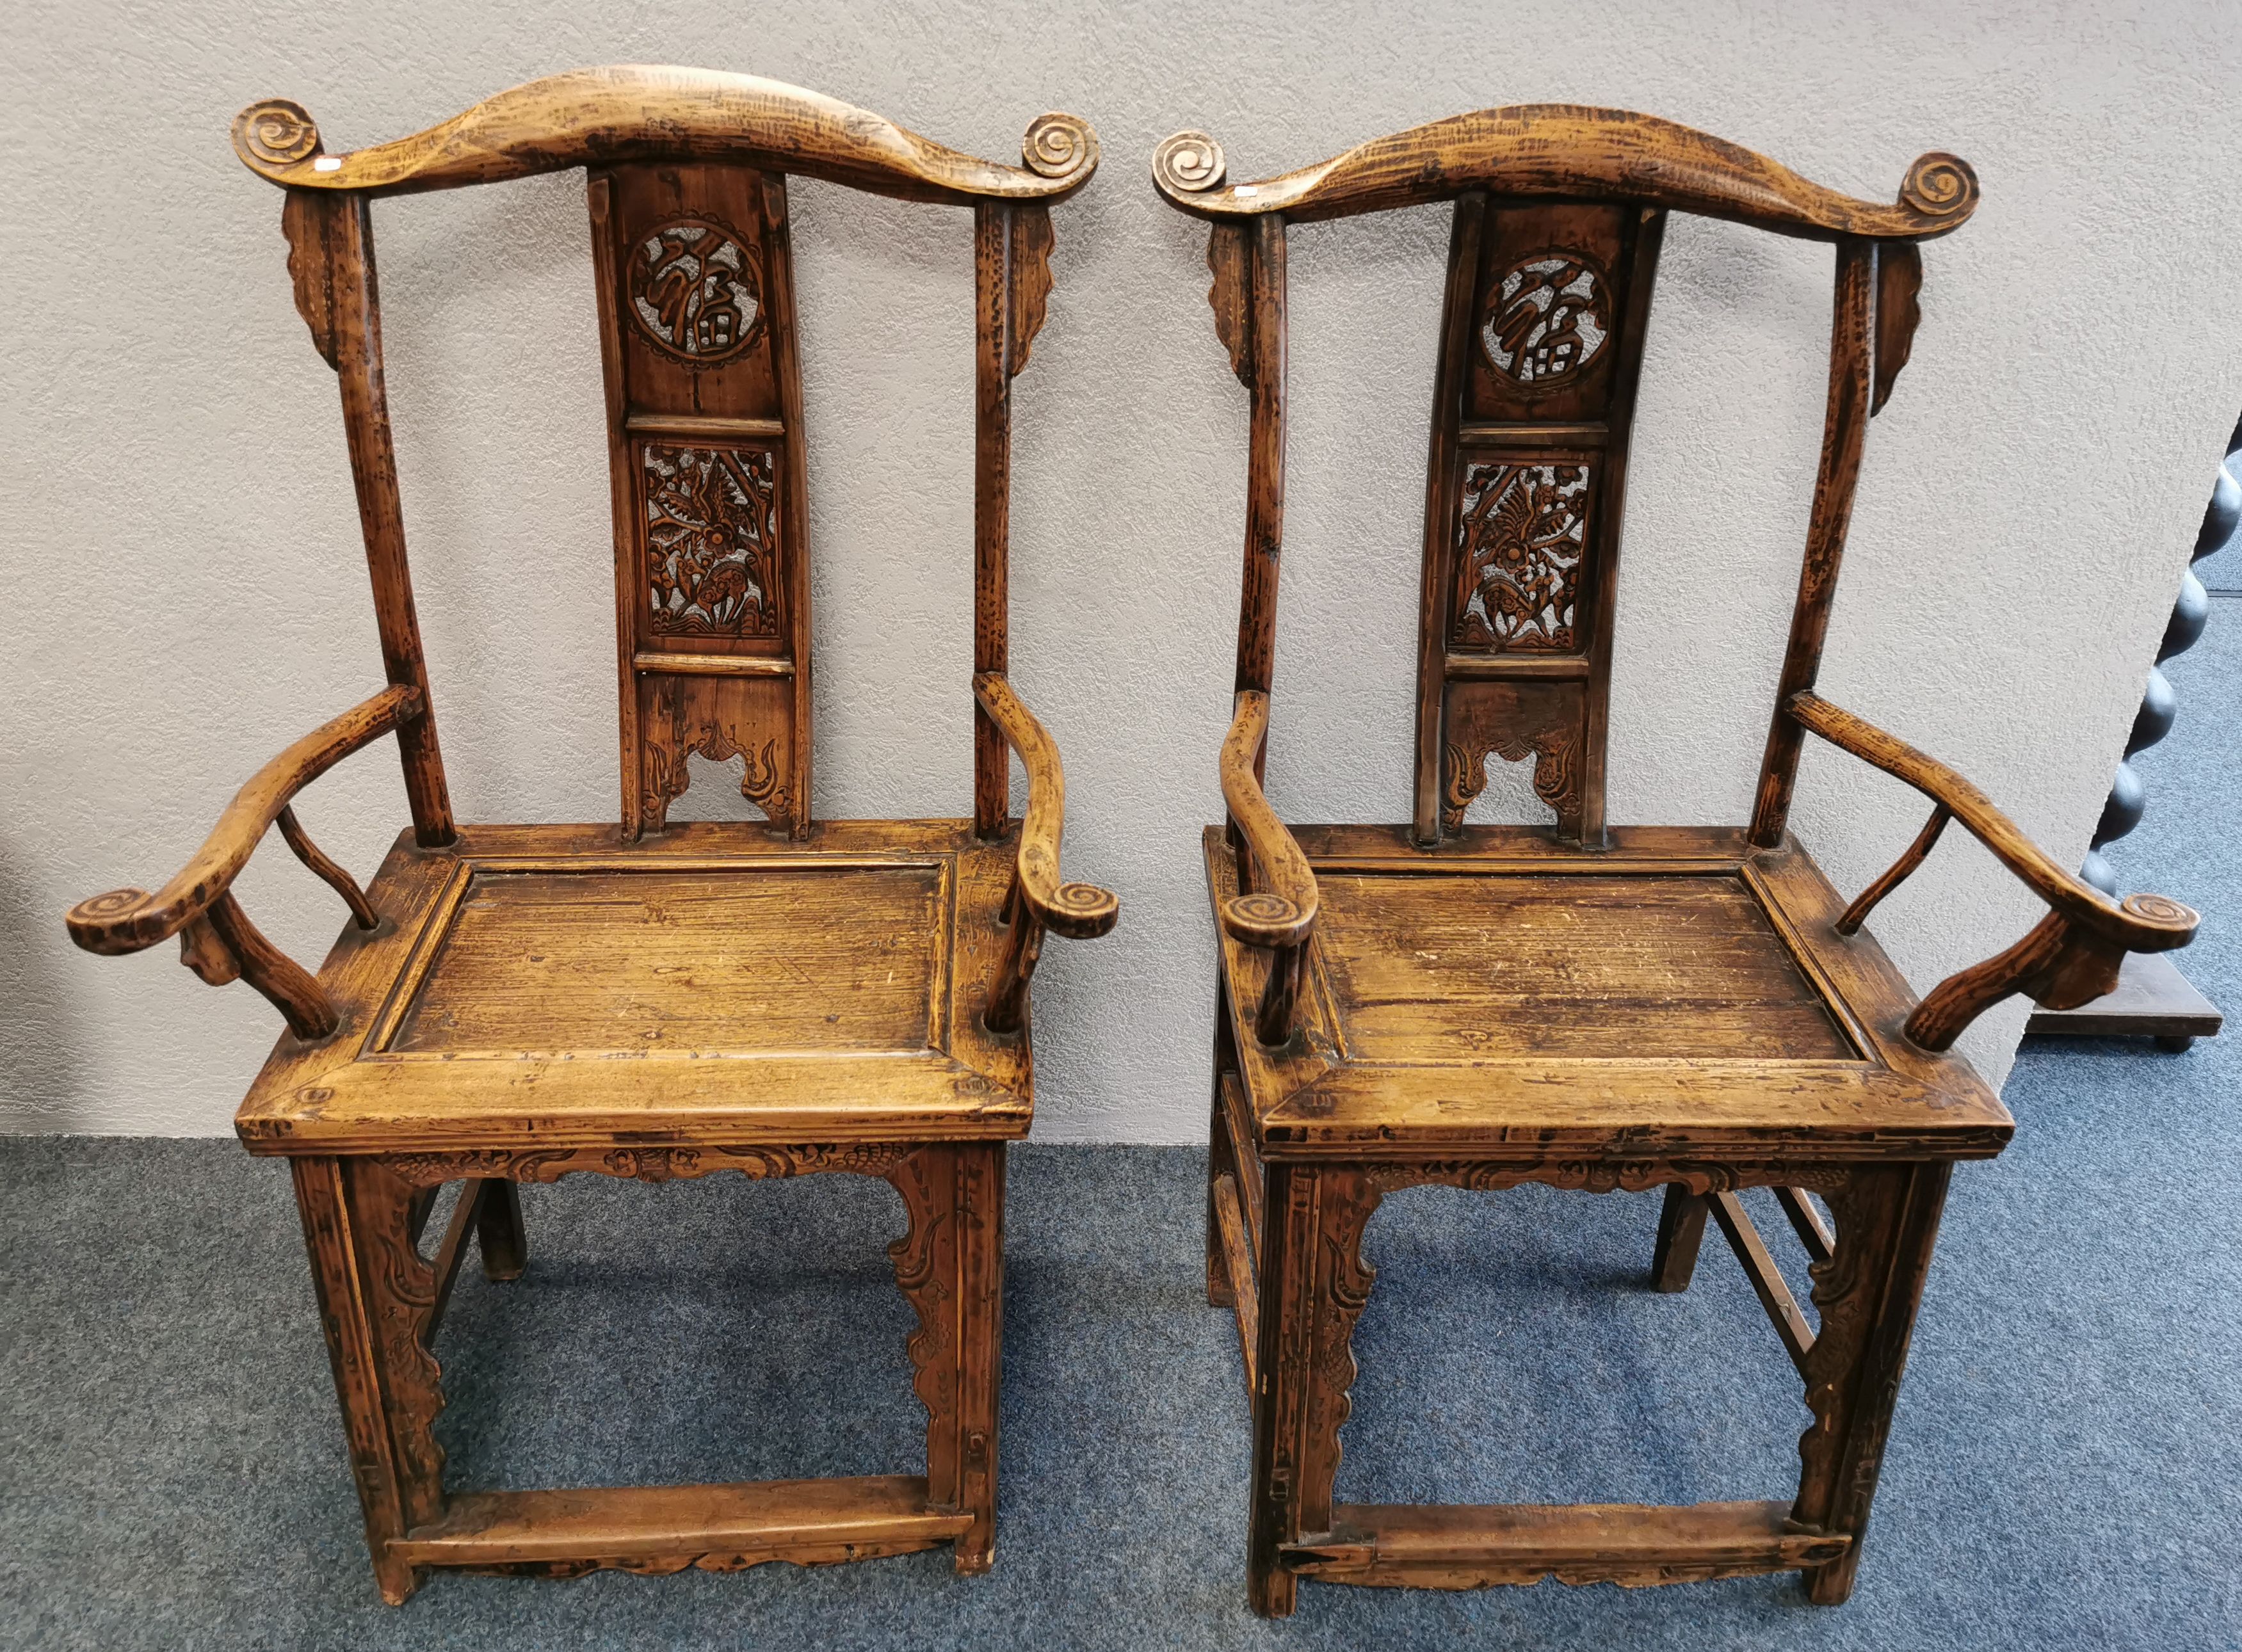 CHNESE ARM CHAIRS